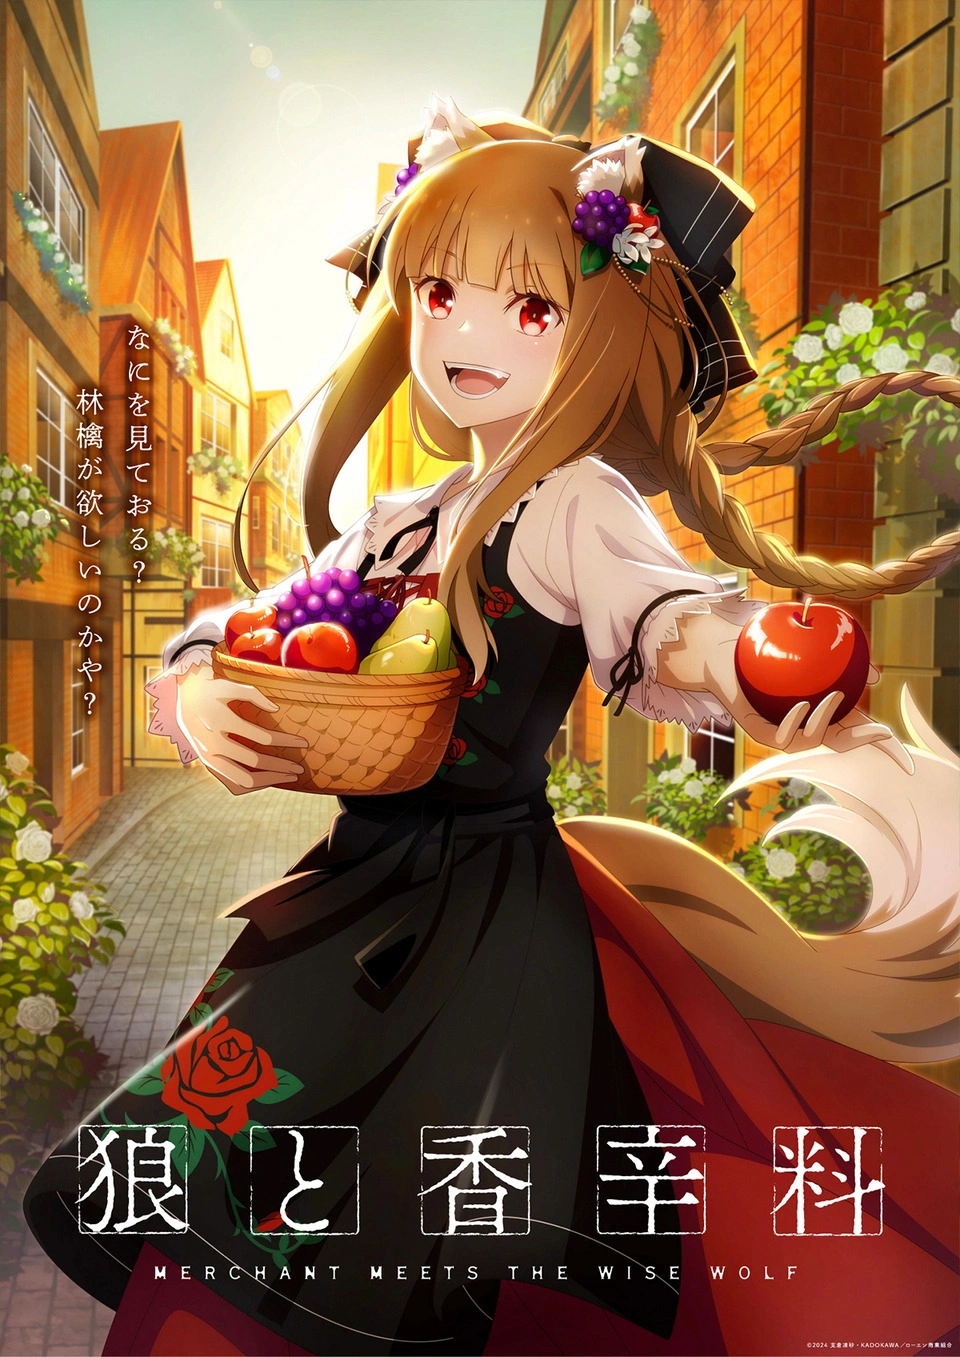 Spice and Wolf: Merchant Meets the Wise Wolf Episode 14 English Subbed